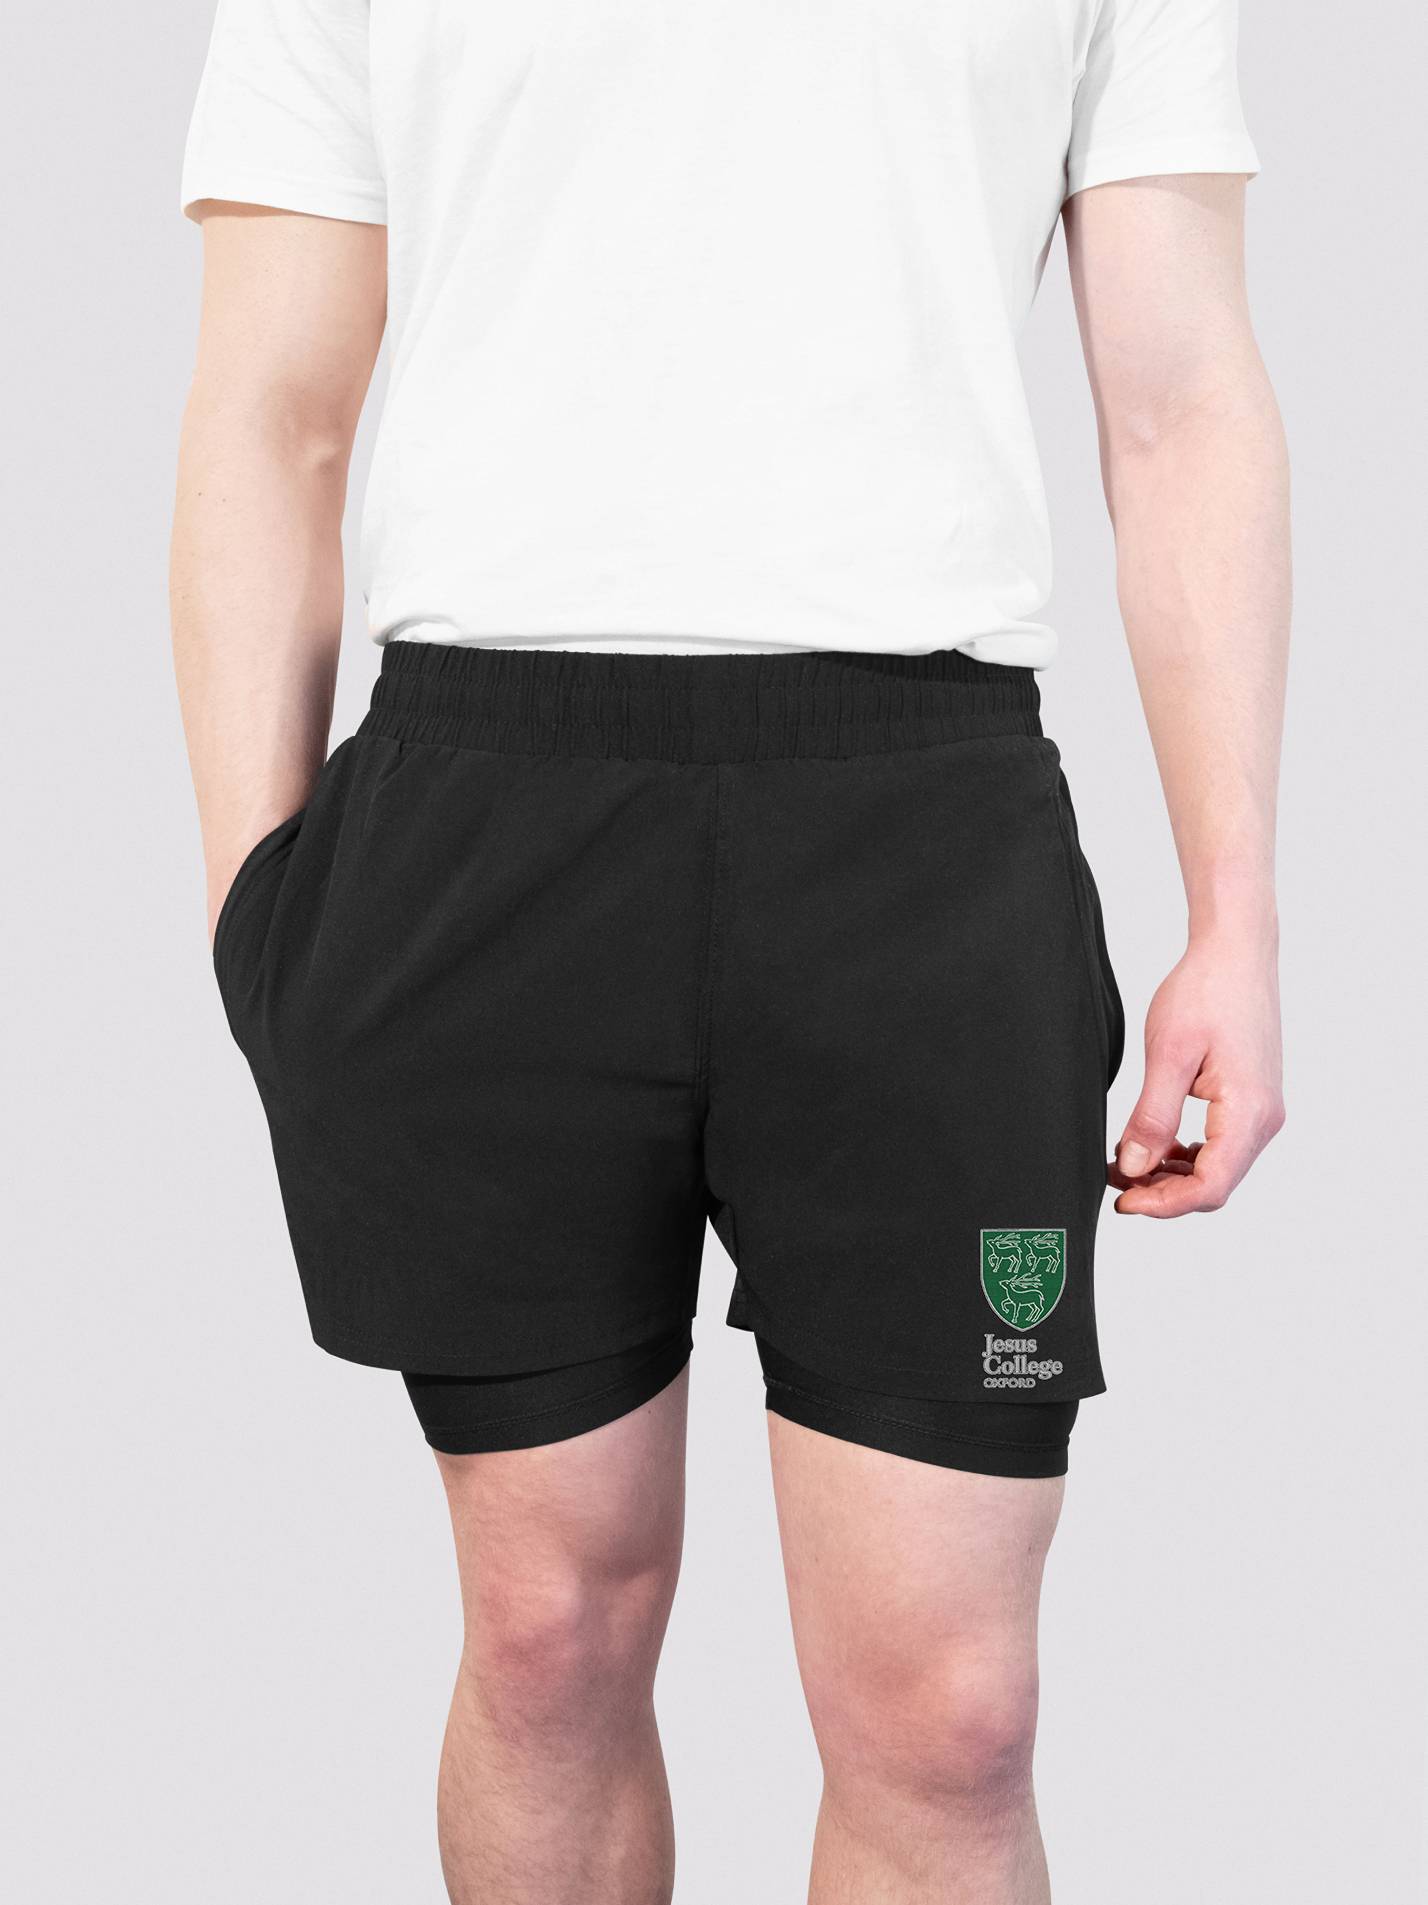 Jesus College Oxford Dual Layer Sports Shorts